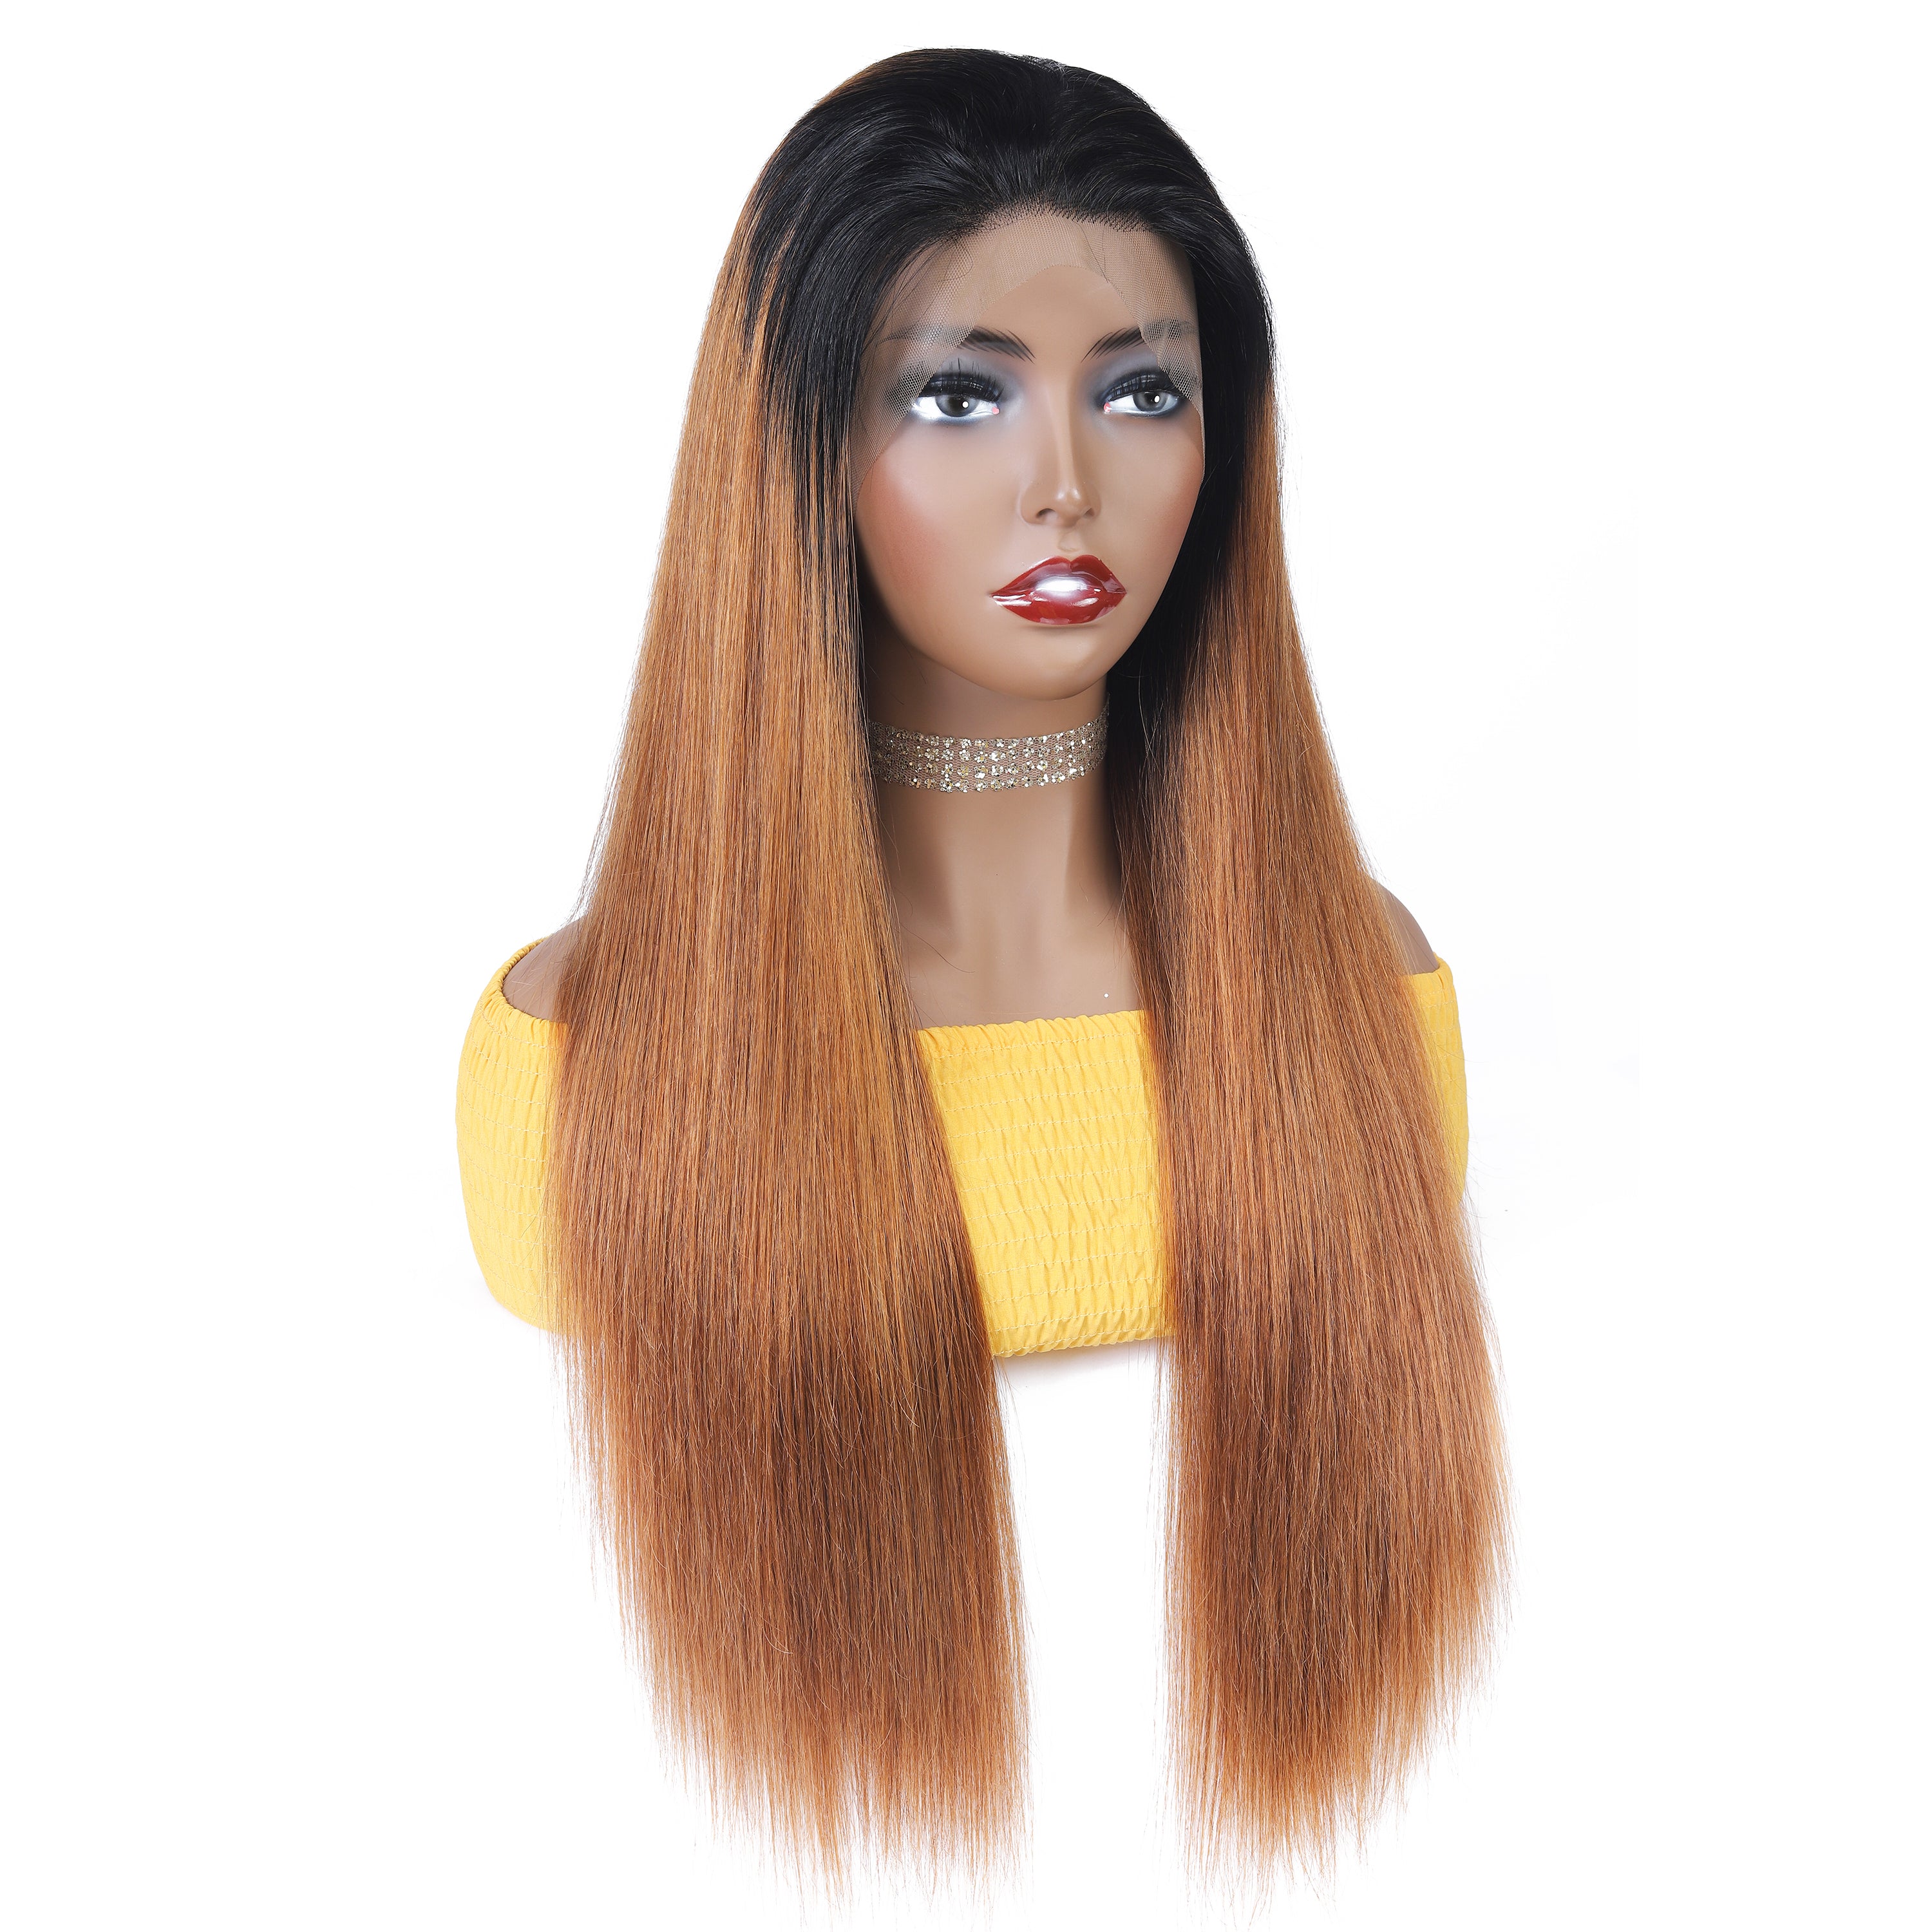 Ronashow Ombre Color Dark Roots 1B/30 Straight 13*4 Lace Frontal Wig